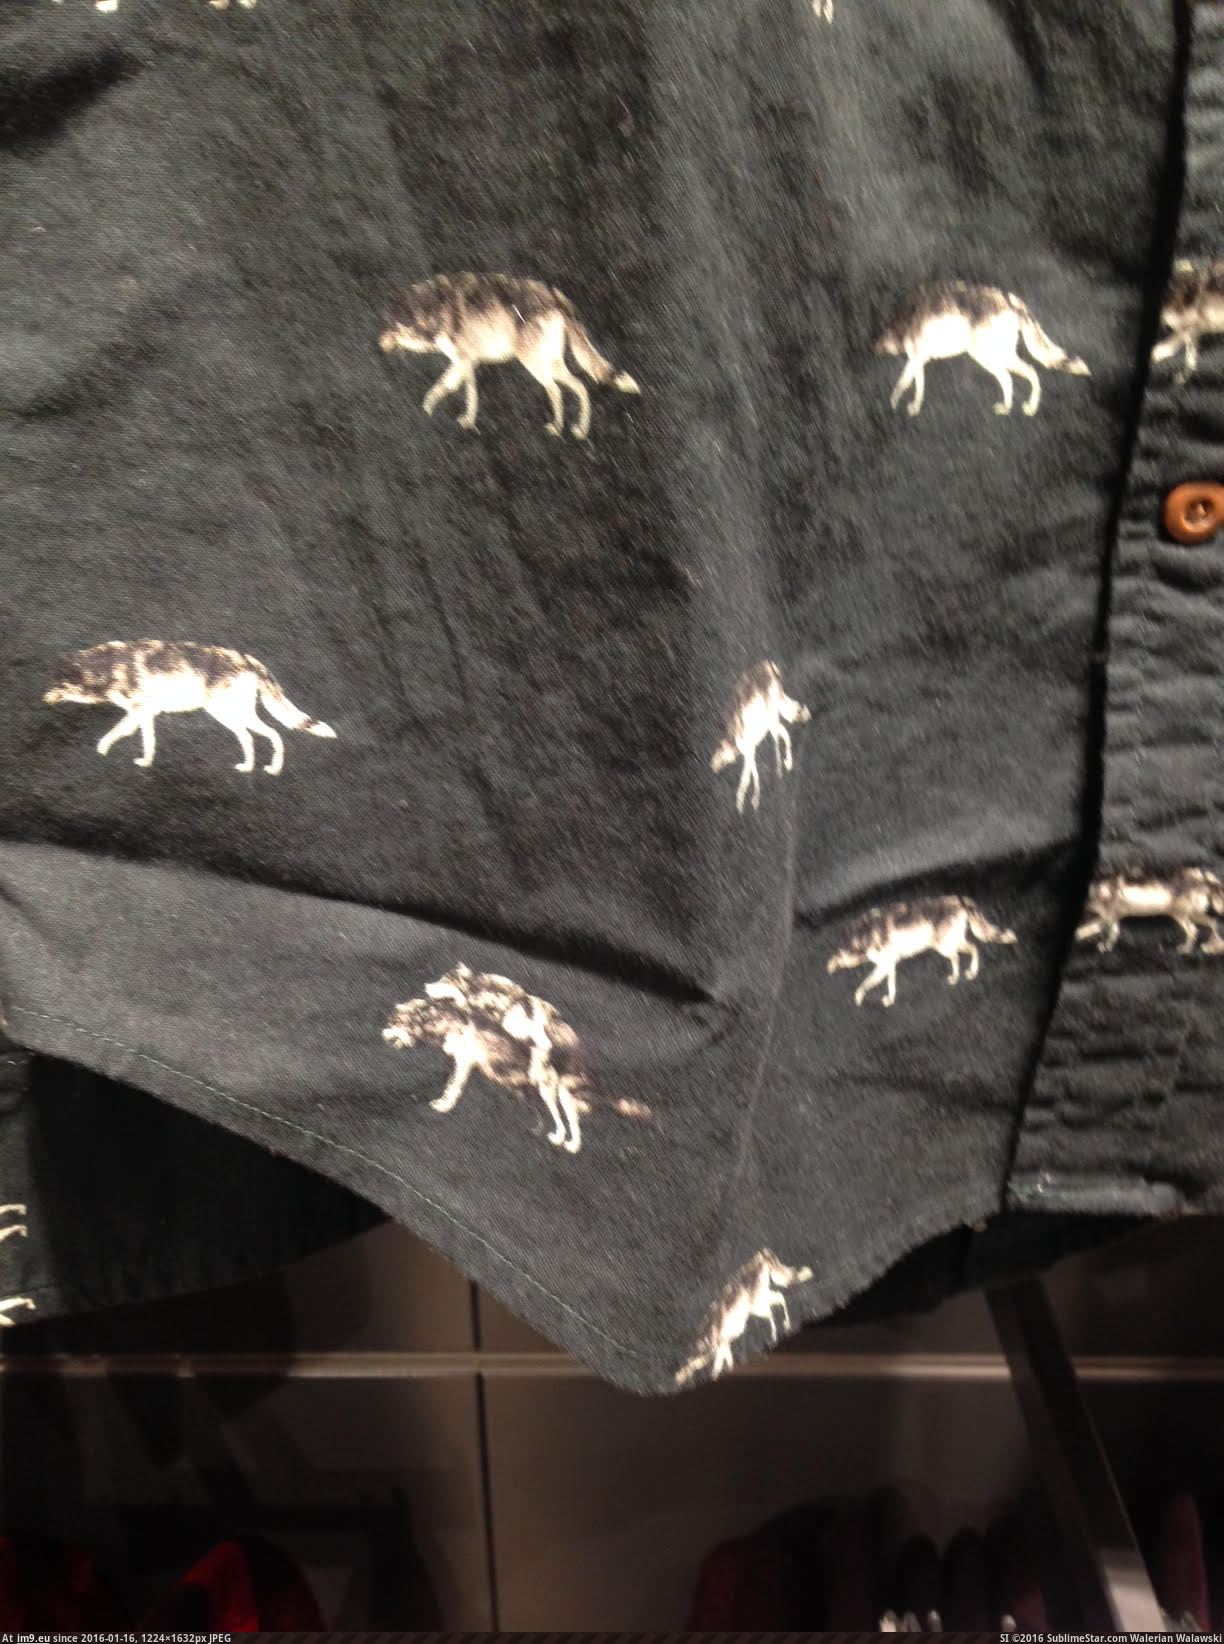 [Mildlyinteresting] Shirt I saw with wolves on it, looked closer and one of the images has two wolves 'mating' (in My r/MILDLYINTERESTING favs)